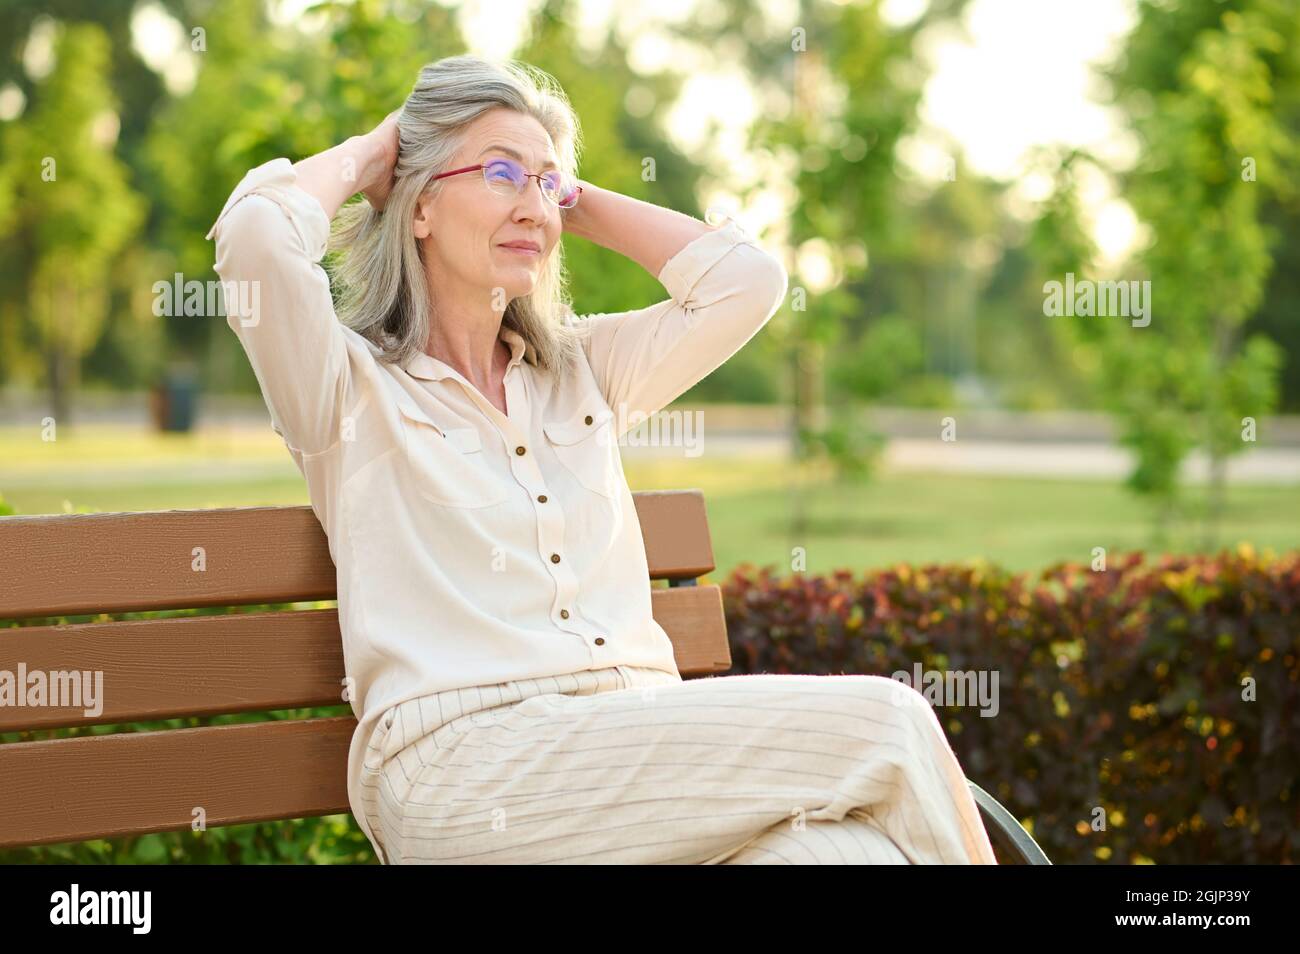 Calm woman resting on park bench Stock Photo